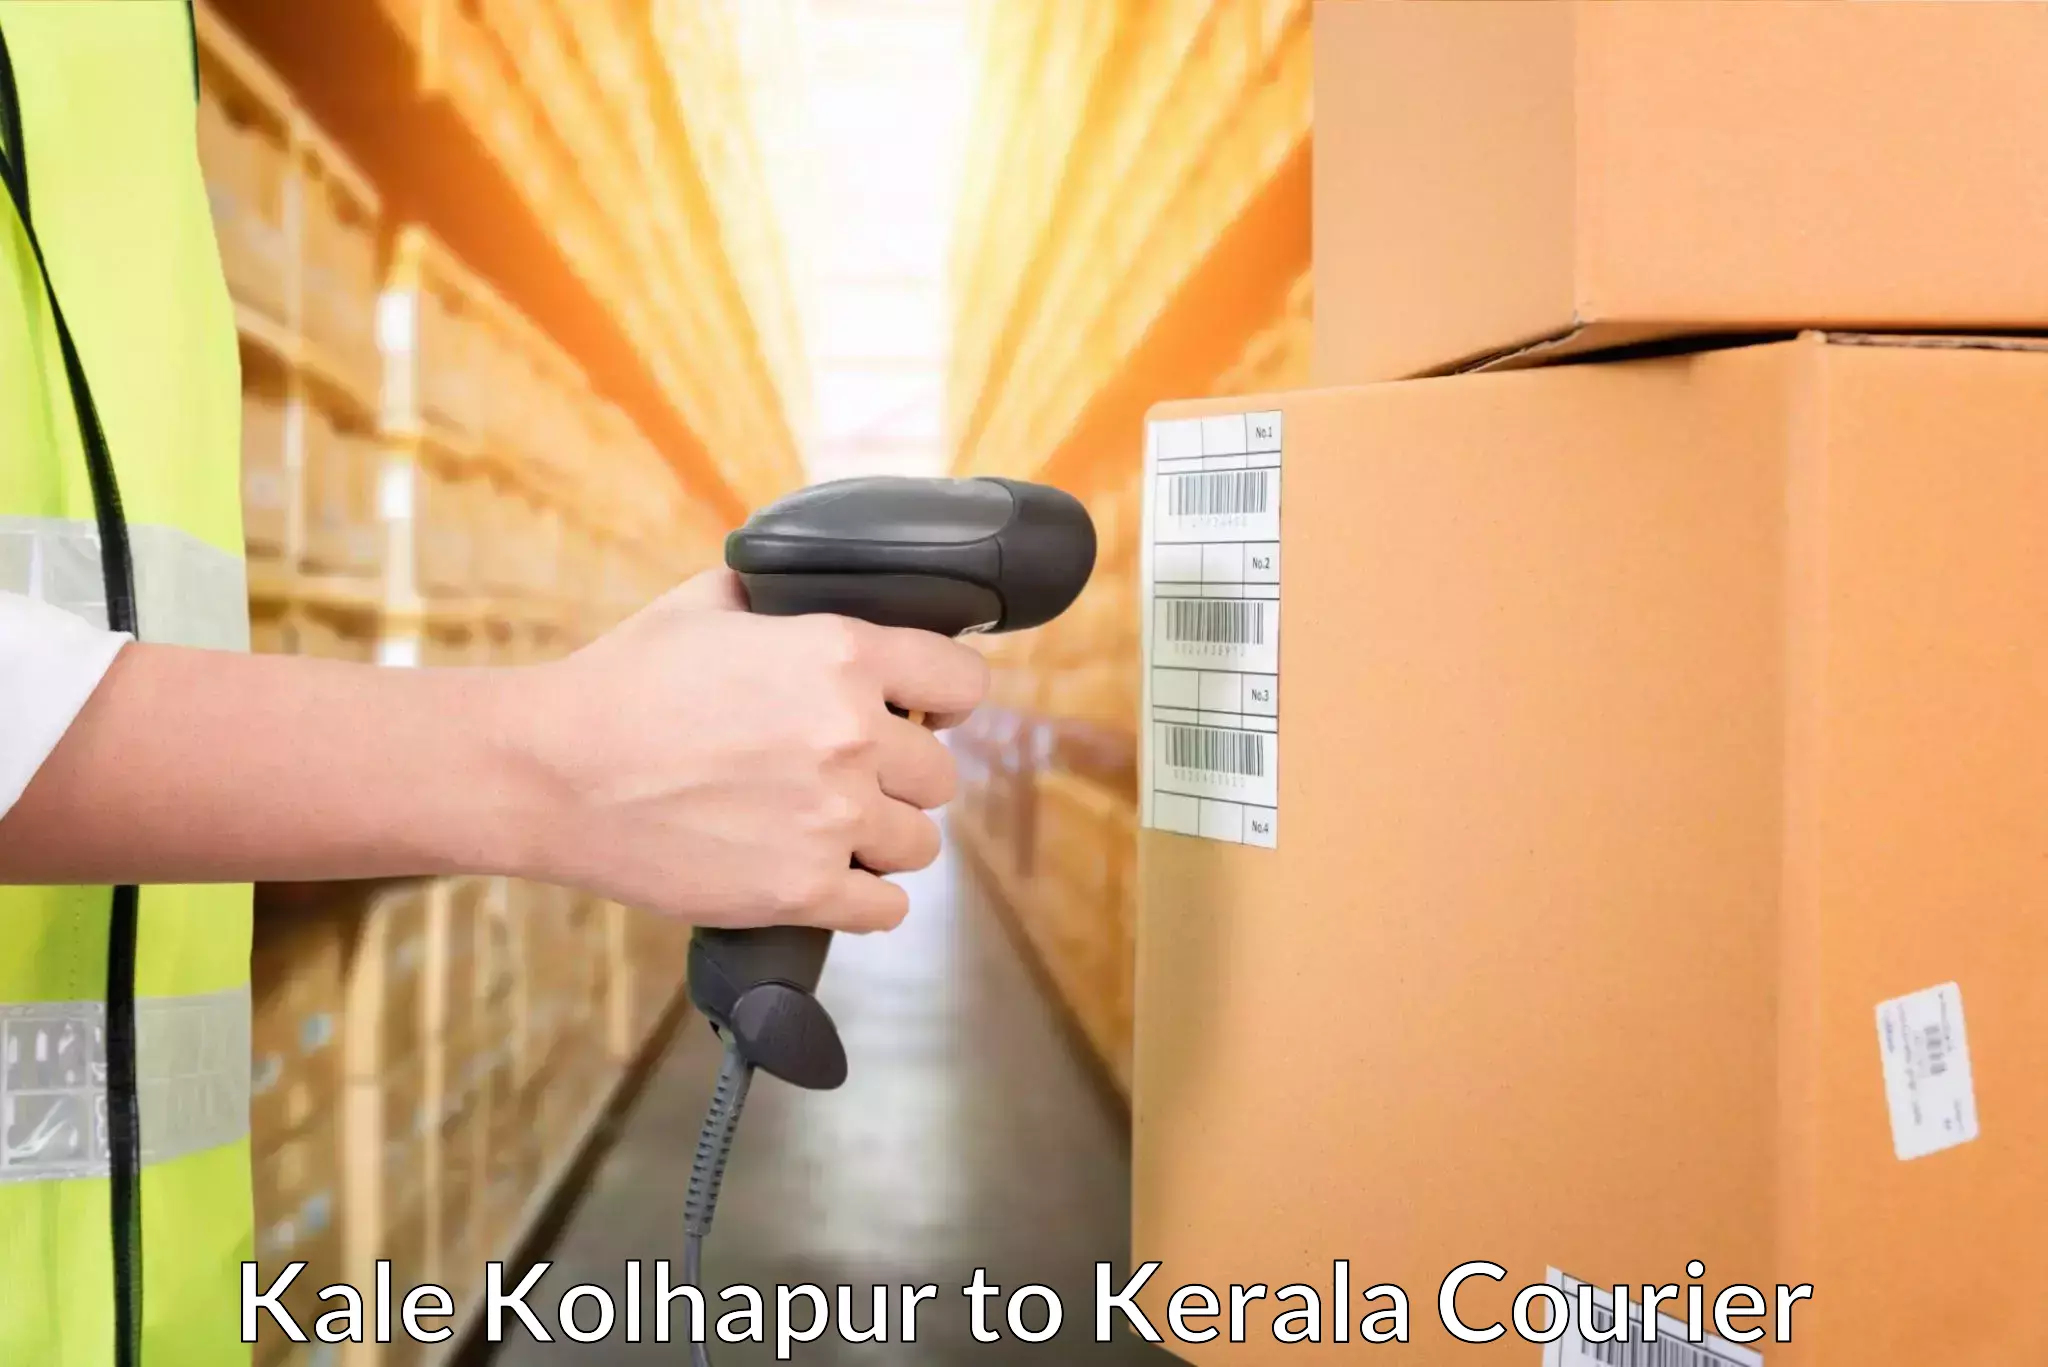 Professional courier services Kale Kolhapur to Sultan Bathery